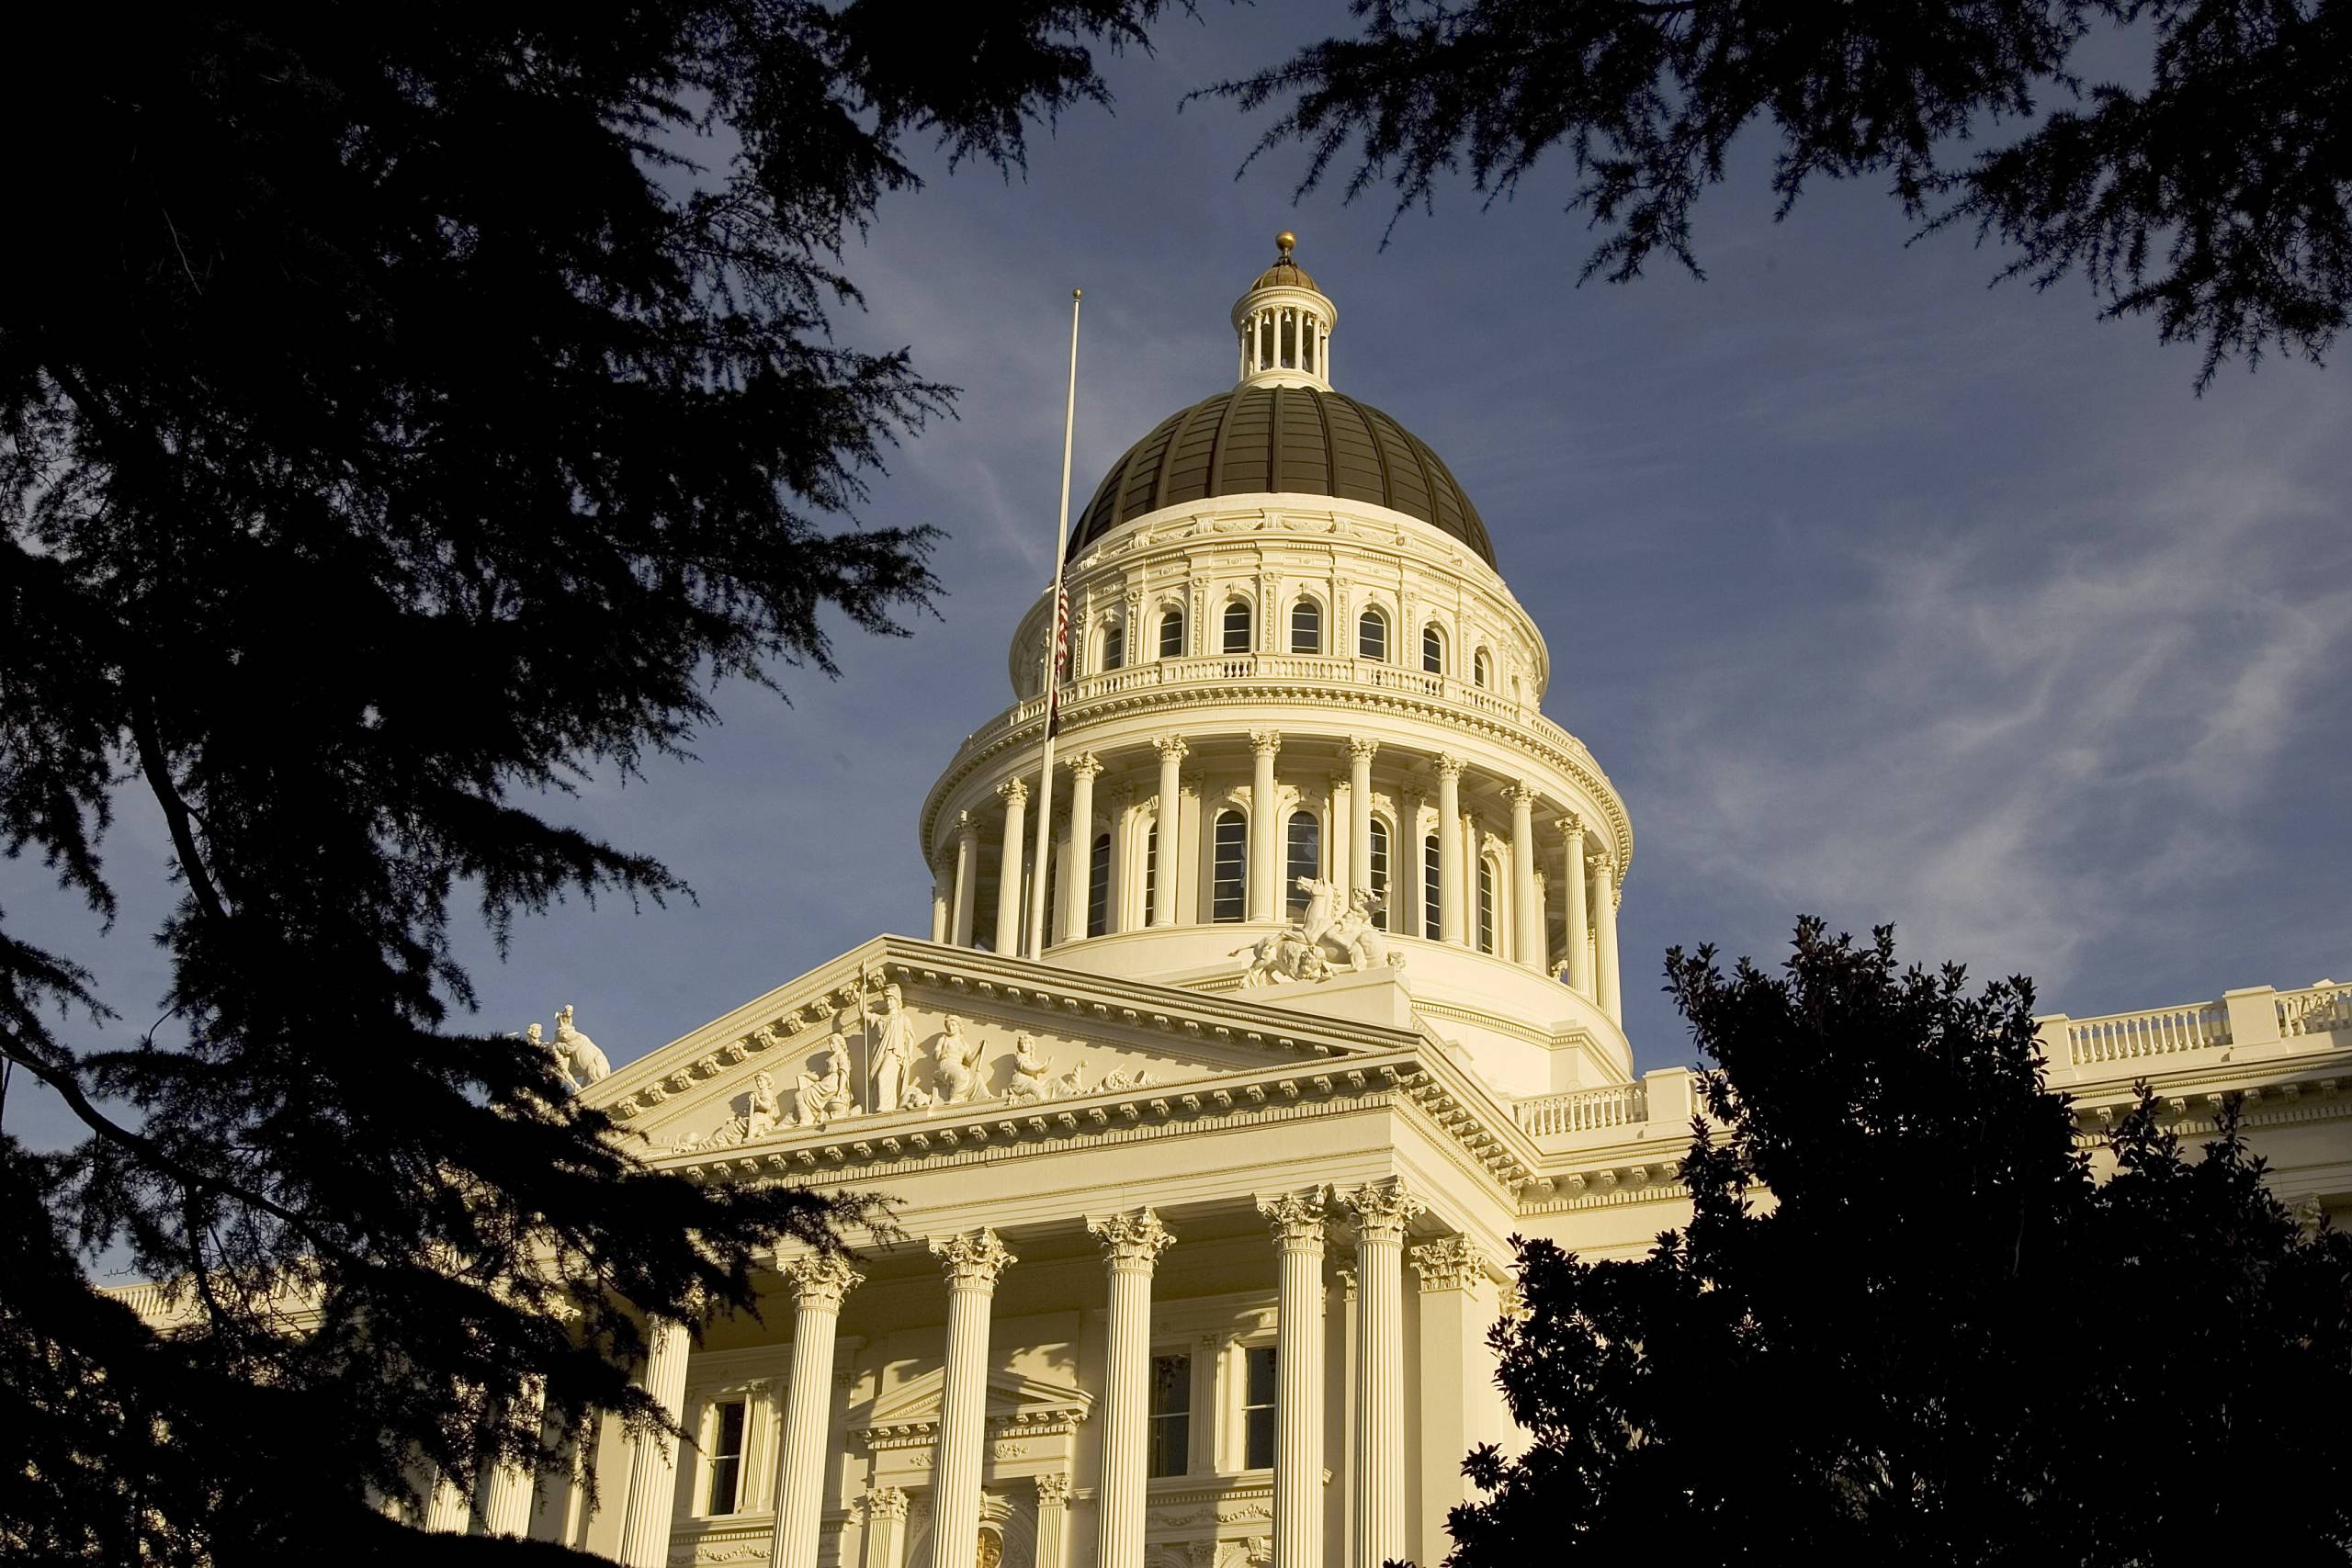 A regal, white building beams down onto foliage and blue skies behind it. It's California's Capitol Building.